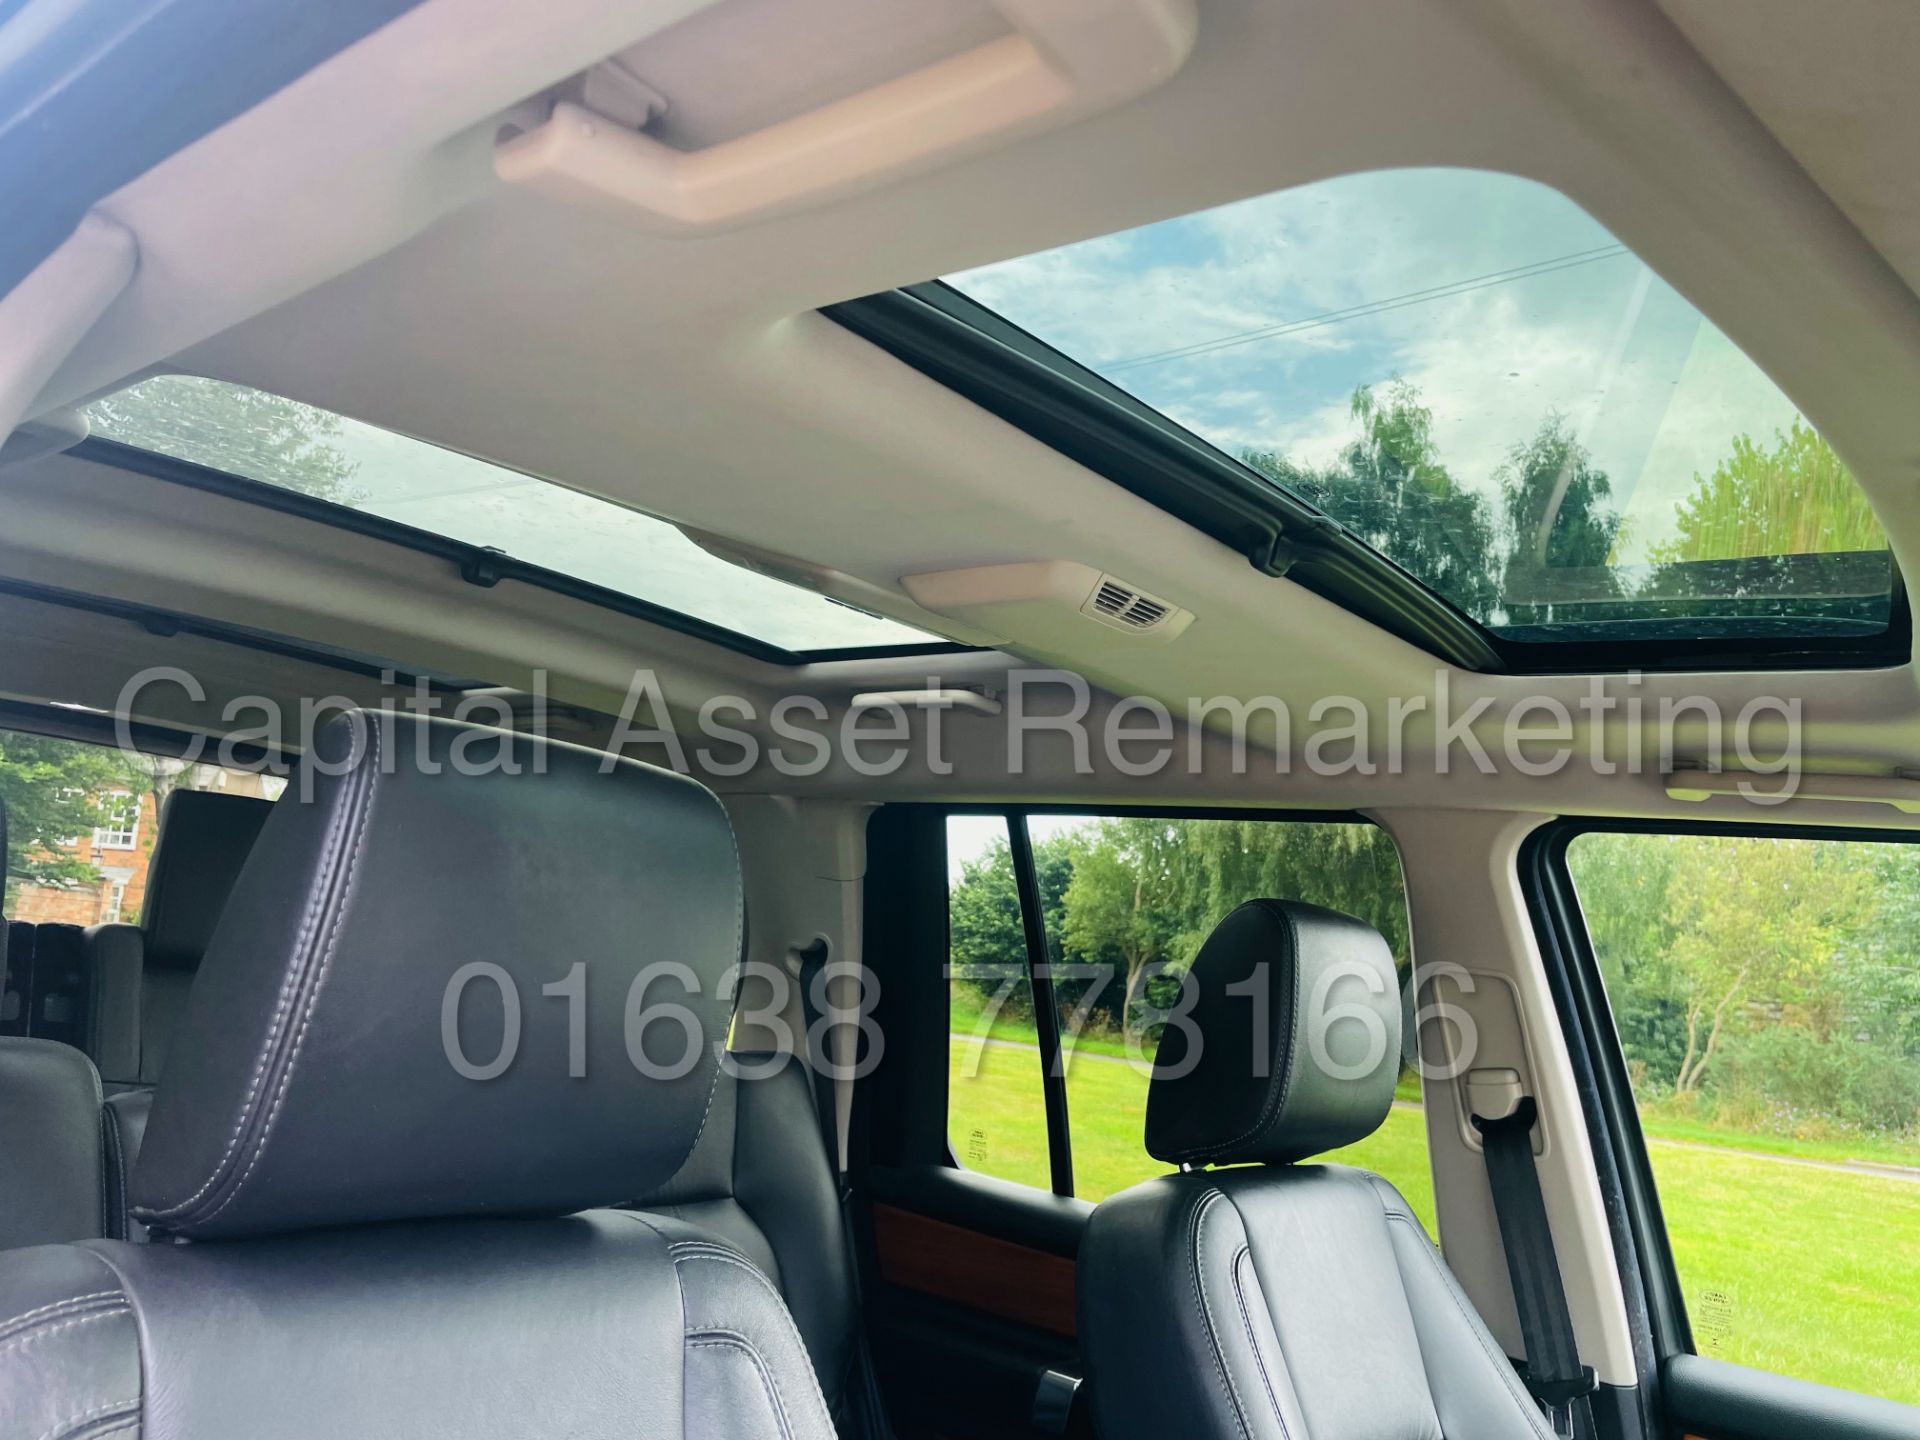 LAND ROVER DISCOVERY 4 *HSE* 7 SEATER SUV (2014 - NEW MODEL) '3.0 SDV6 - 255 BHP - 8 SPEED AUTO' - Image 49 of 61